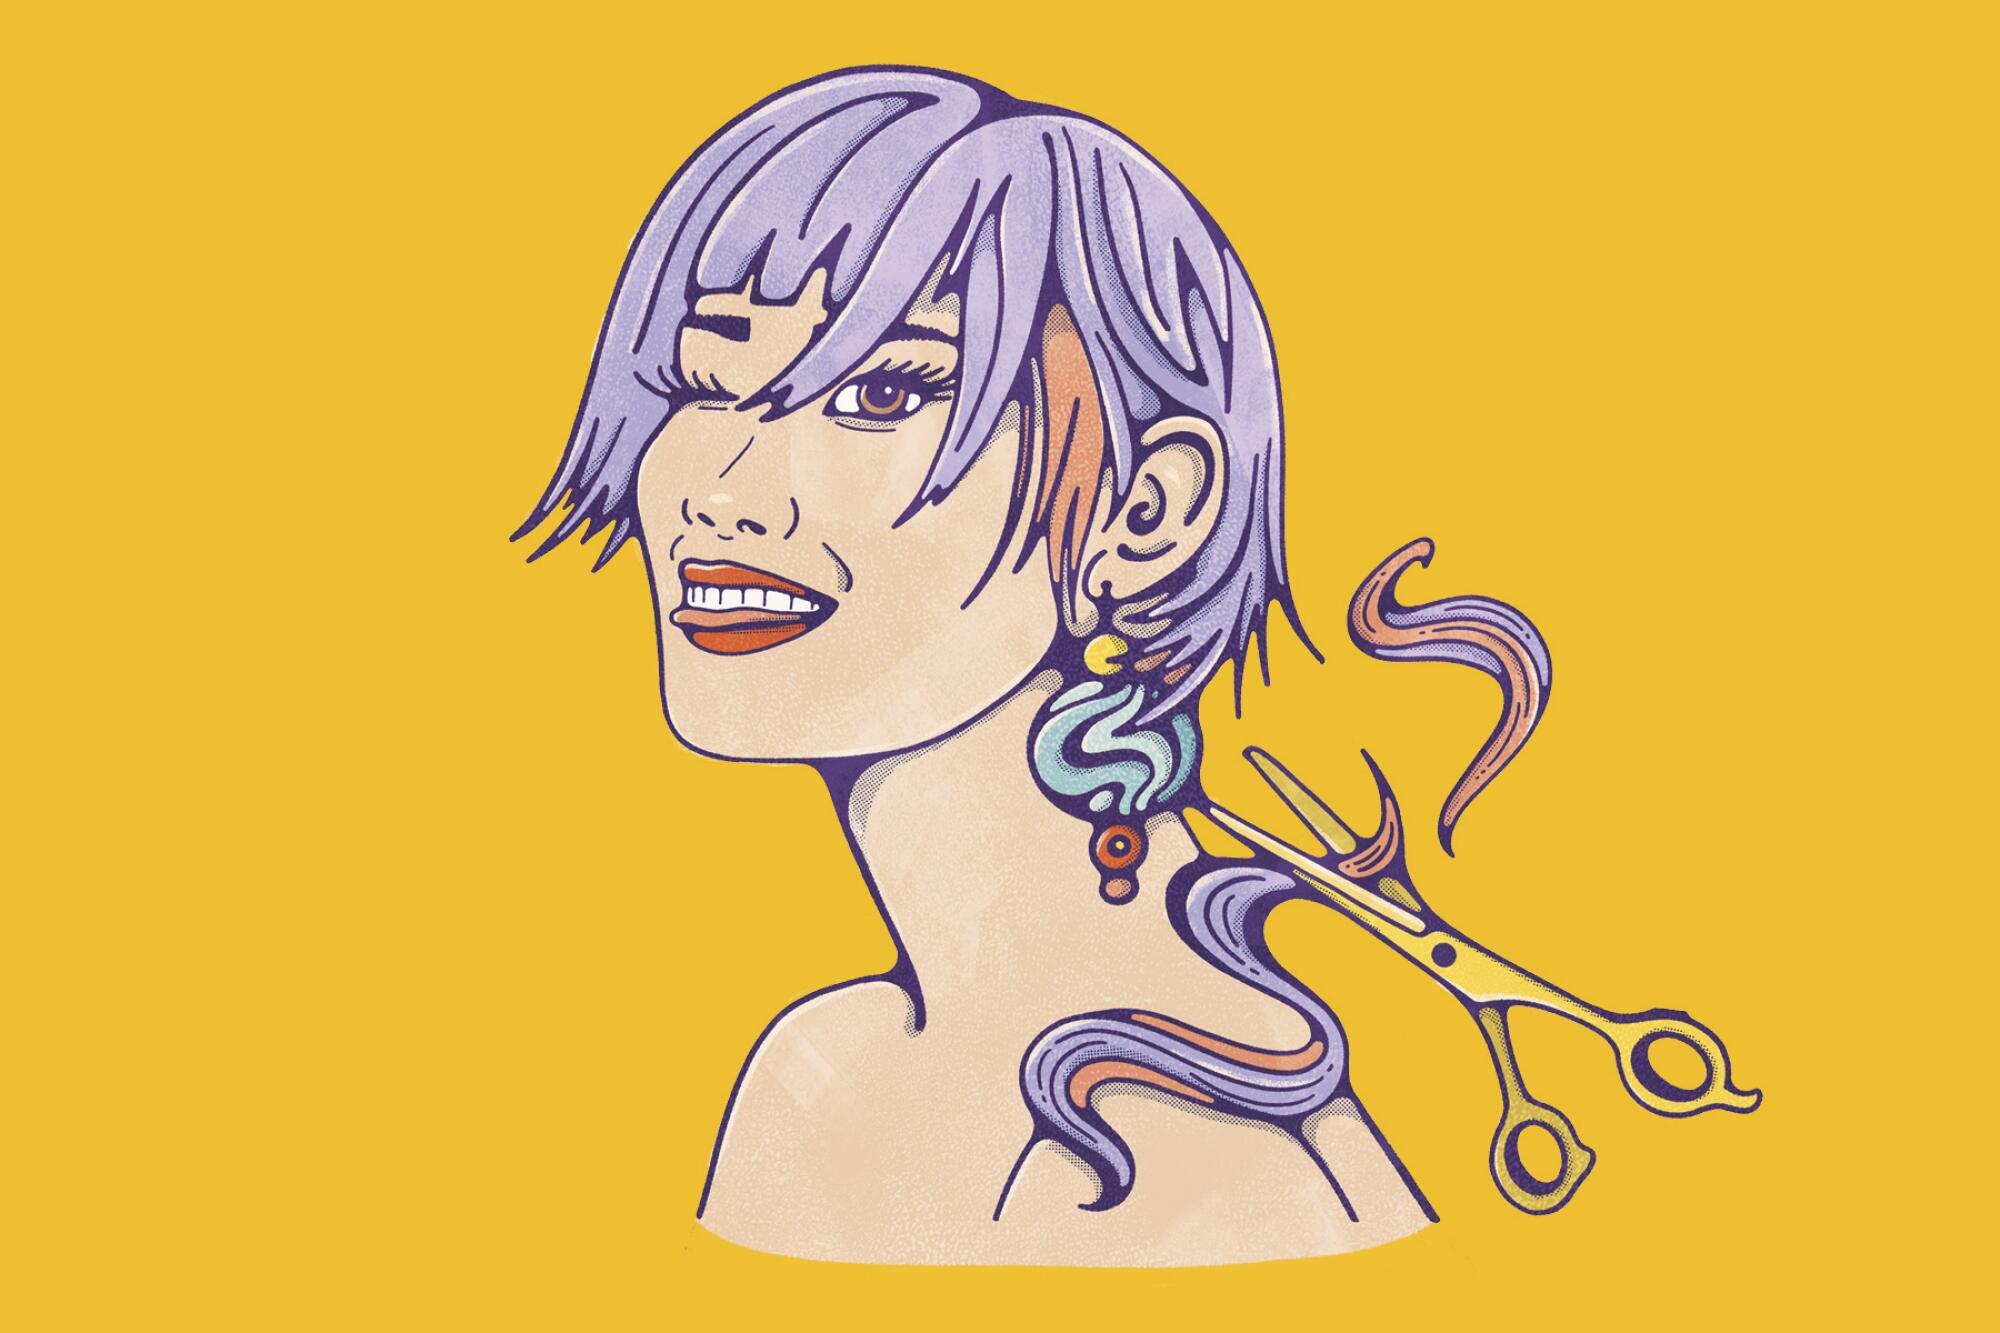 Illustration for a NYNY story about getting a new hair cut